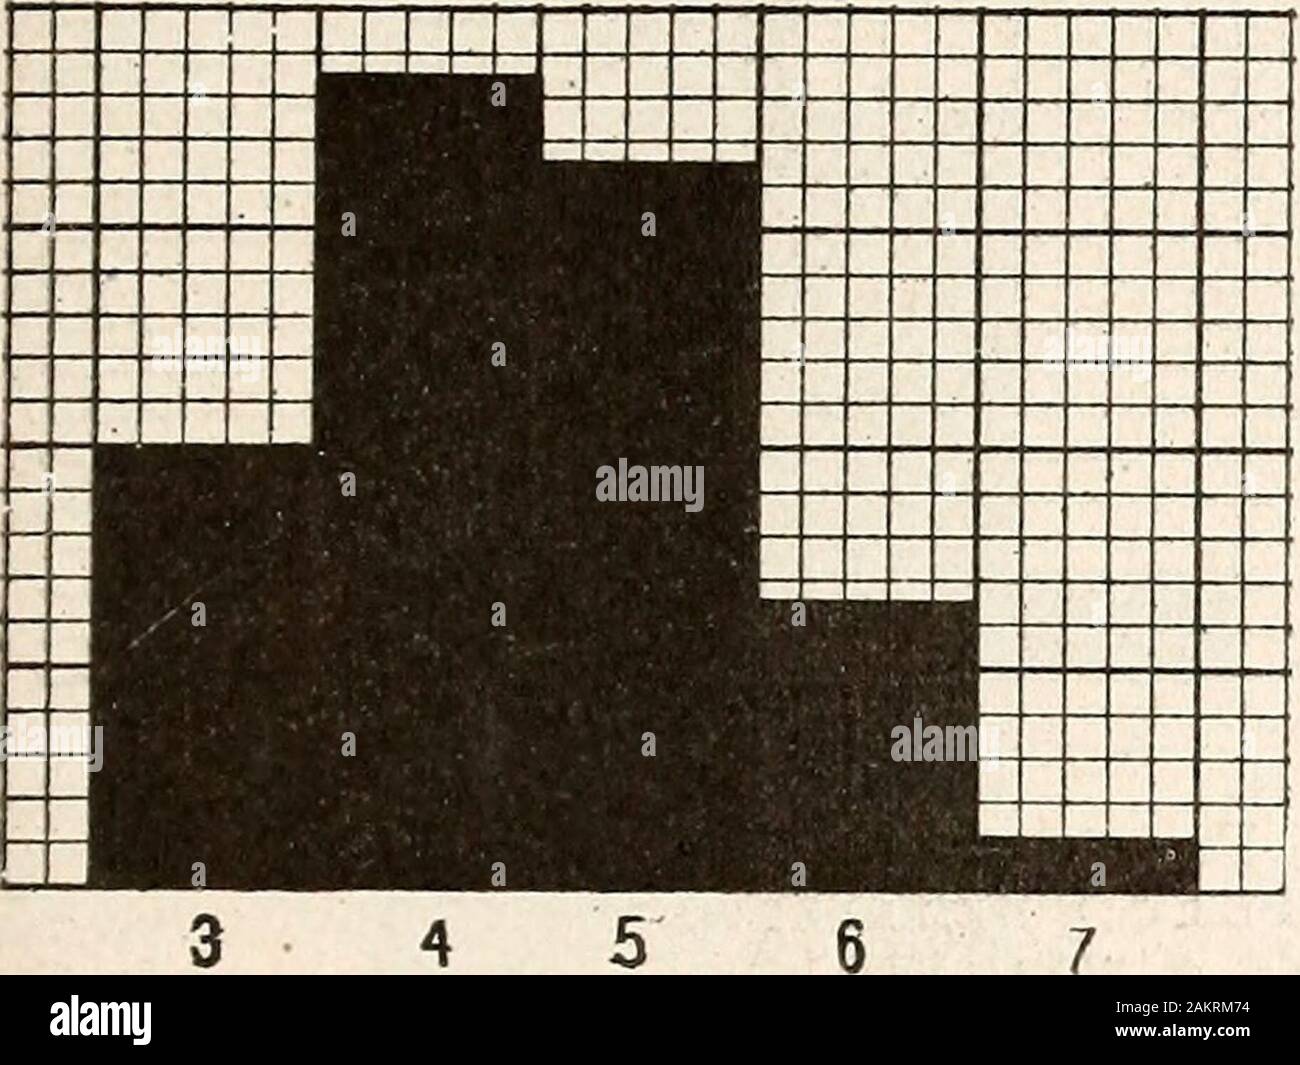 Annual report of the North Carolina Agricultural Experiment Station . Fig. 16.—Ascochyta Chrysanthemi Stevens.Polygon of spores from pycnidium No. 1, largetype. 3 should cover 20 squares instead of 25. division equal 3.7 jjl. VARIATION OF FUNGI DUE TO ENVIRONMENT. Pycnidium No. 2. Large type.. Fig. 17.—Ascochyta Chrysanthemi Ste-vens. Polygon of spores from pycnid-ium No. 2, large type. M= 4.4318 ±0.0398o-= .9589 ±0.0281C. V =21.638 ±0.650n =254 Pycnidium No. 3. From a plate bearingone large colony. The whole colony wascharacteristically one of few pycnidia whichwere of large type and light co Stock Photo